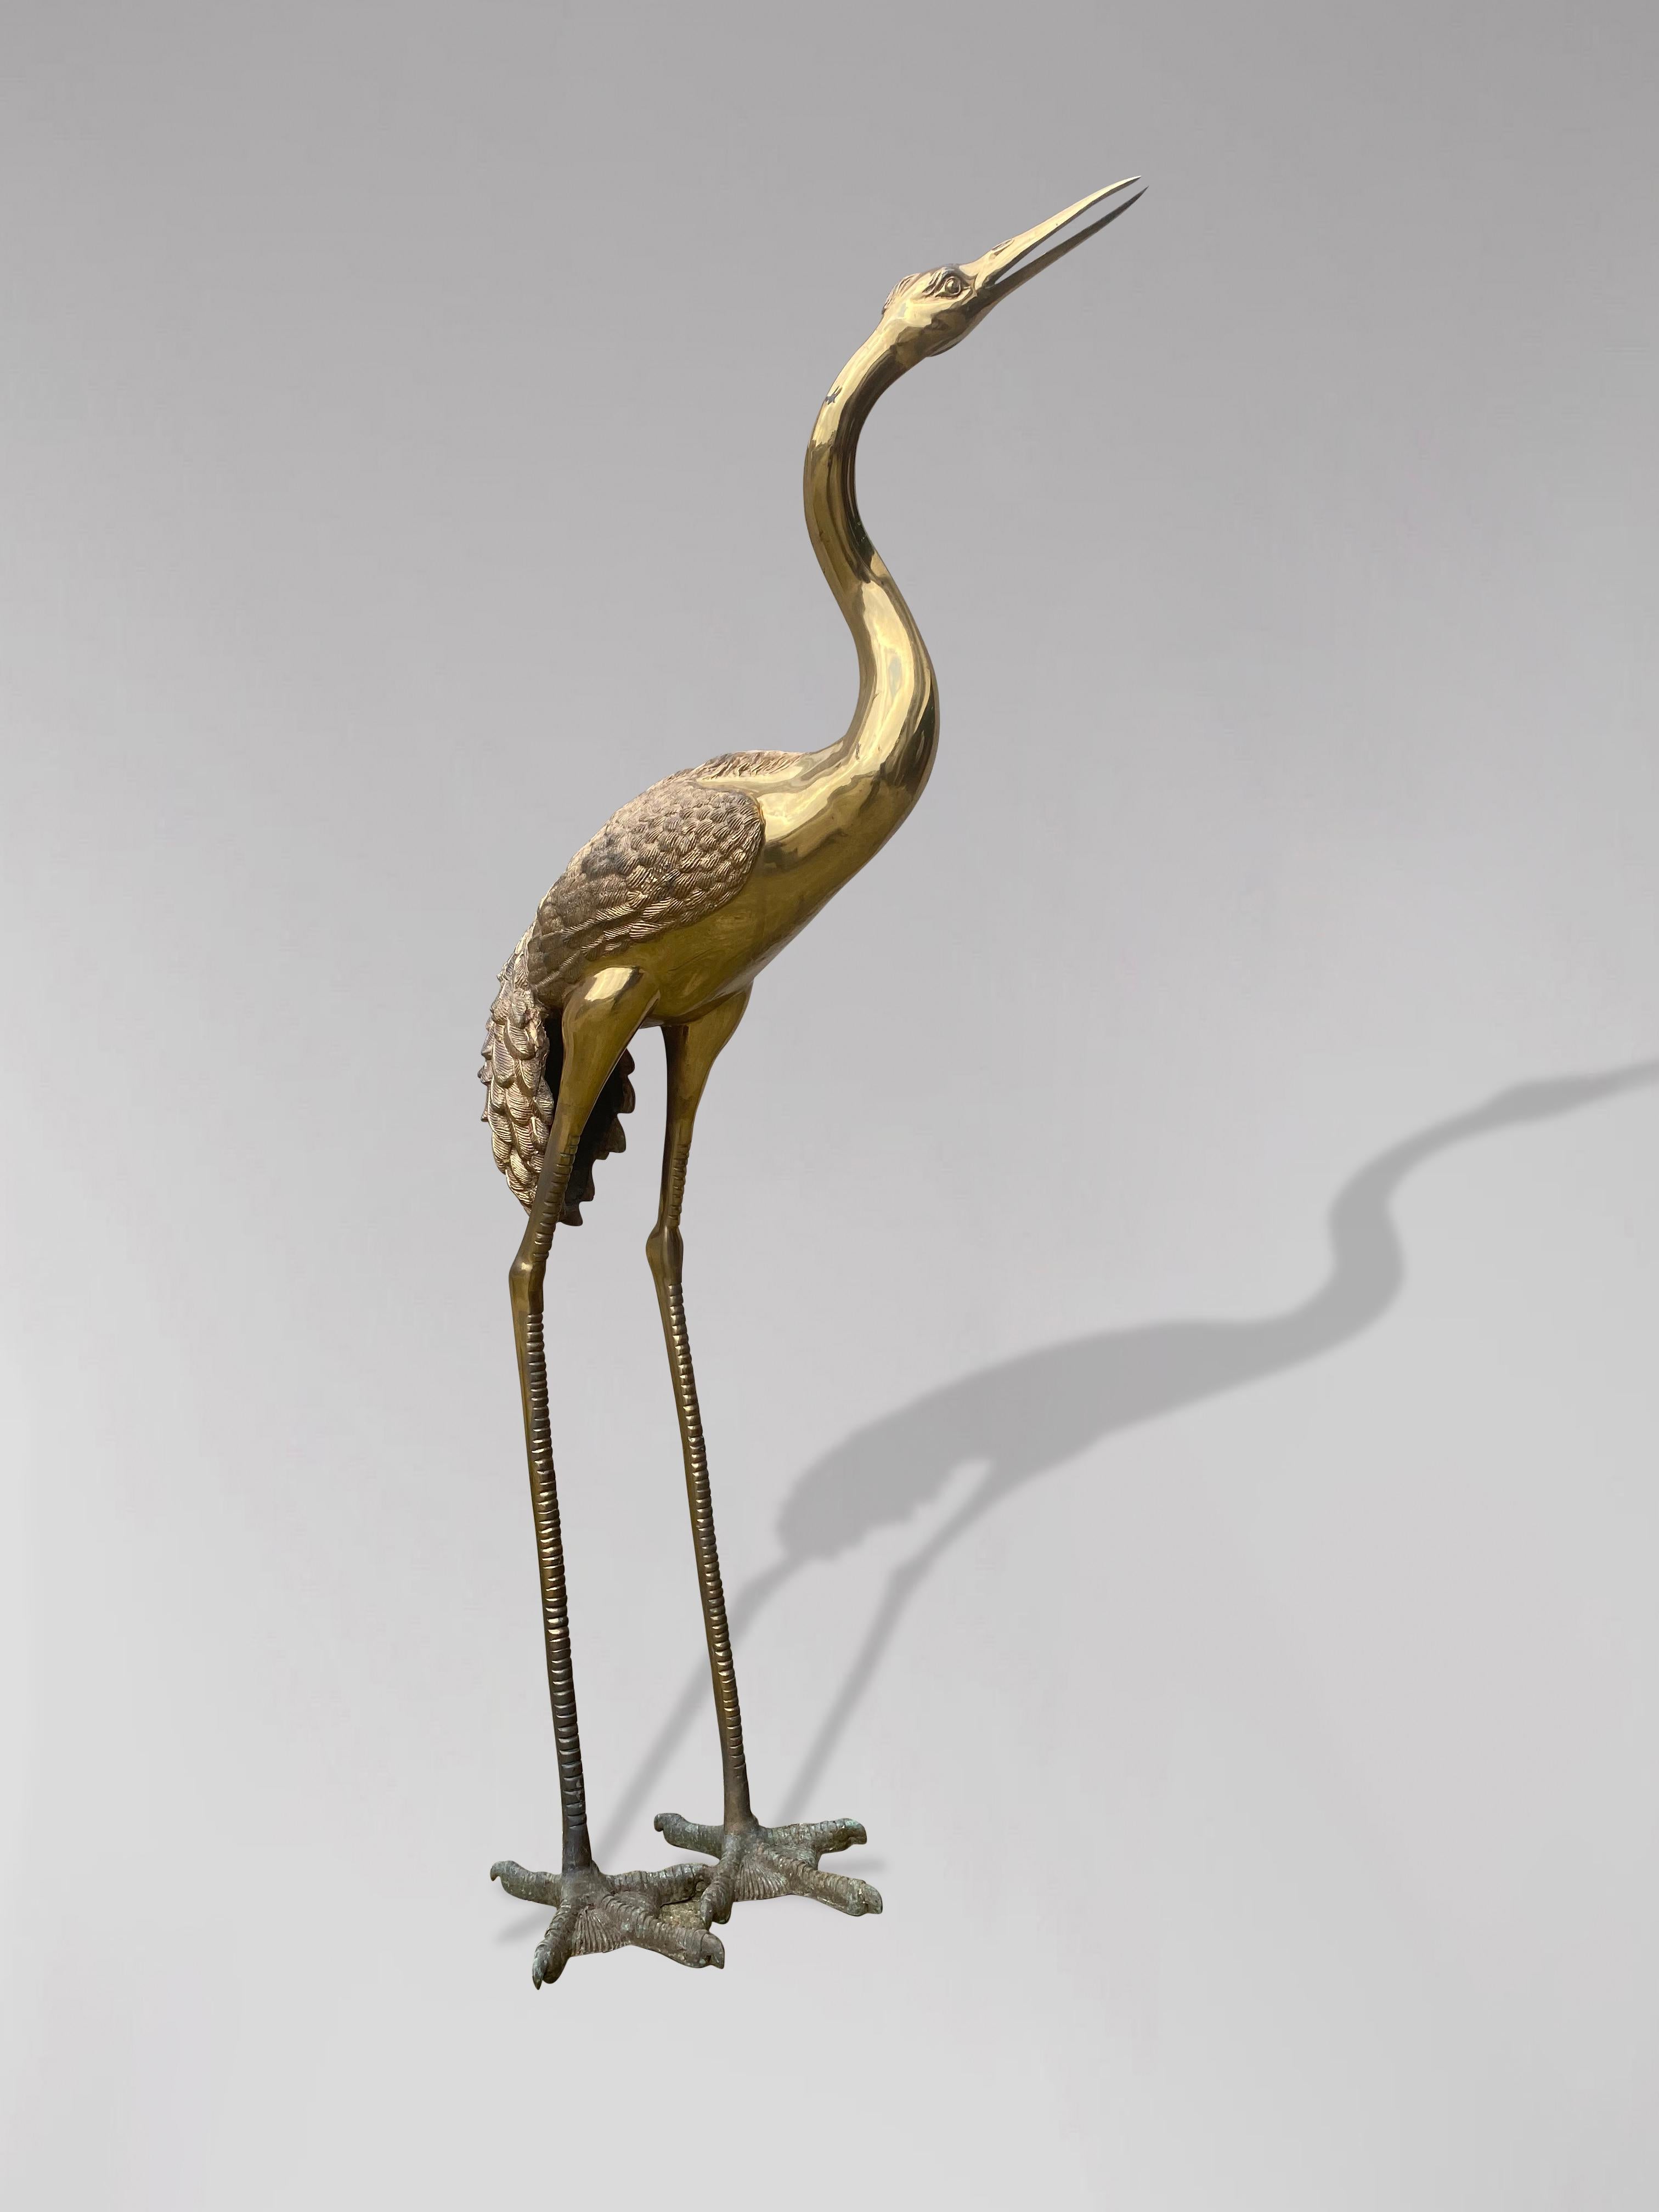 A 1960s life size free standing solid brass heron sculpture with an elegant posture with nice details and features. In perfect condition. A highly decorative piece which brings that Hollywood Regency glamour into your home.

The dimensions